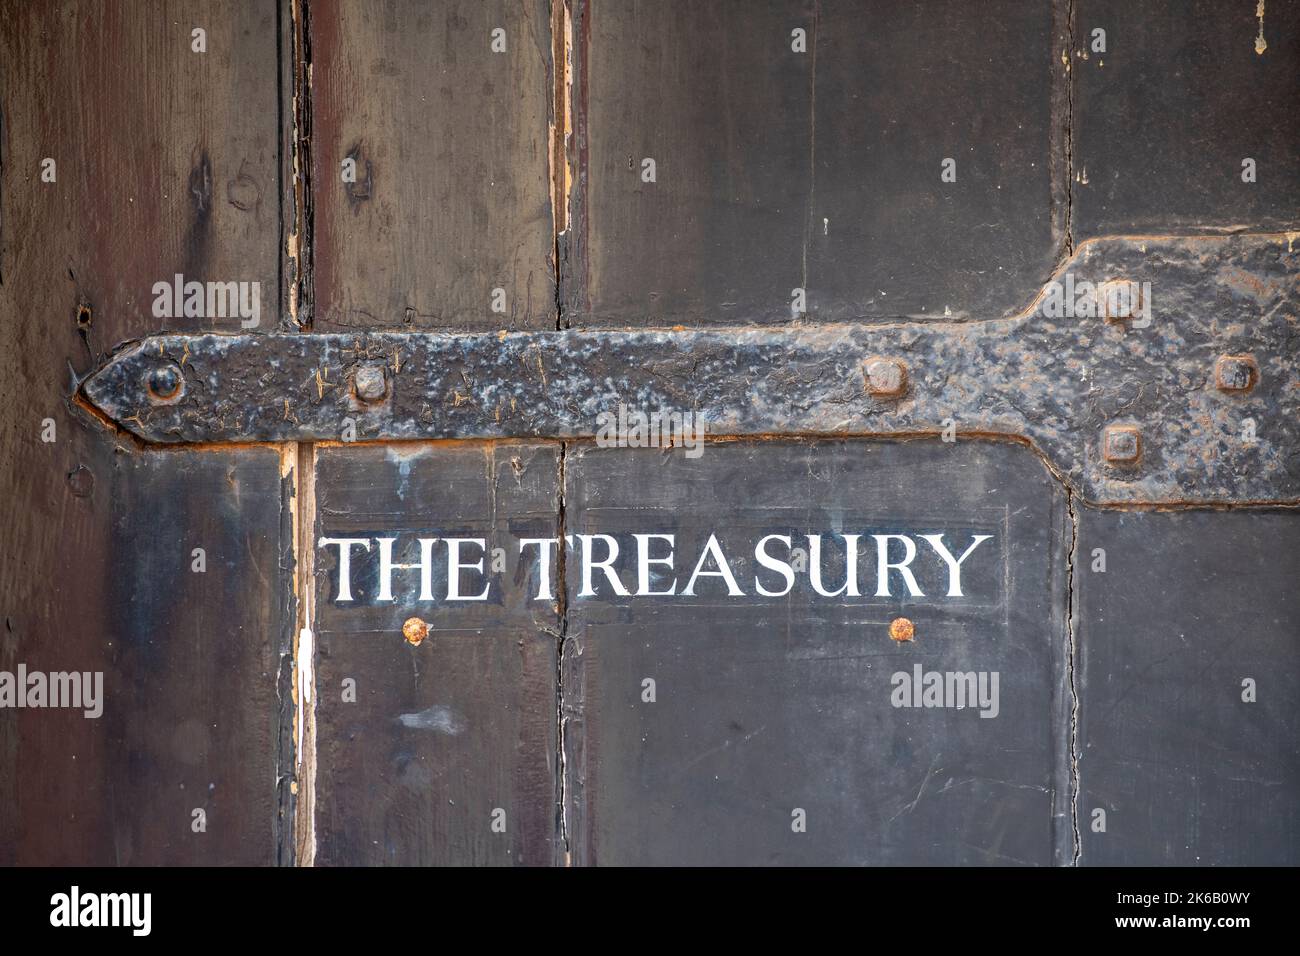 the treasury, large antique sign, large antique door with the treasury sign on it, large strap hinge on antique door. Stock Photo